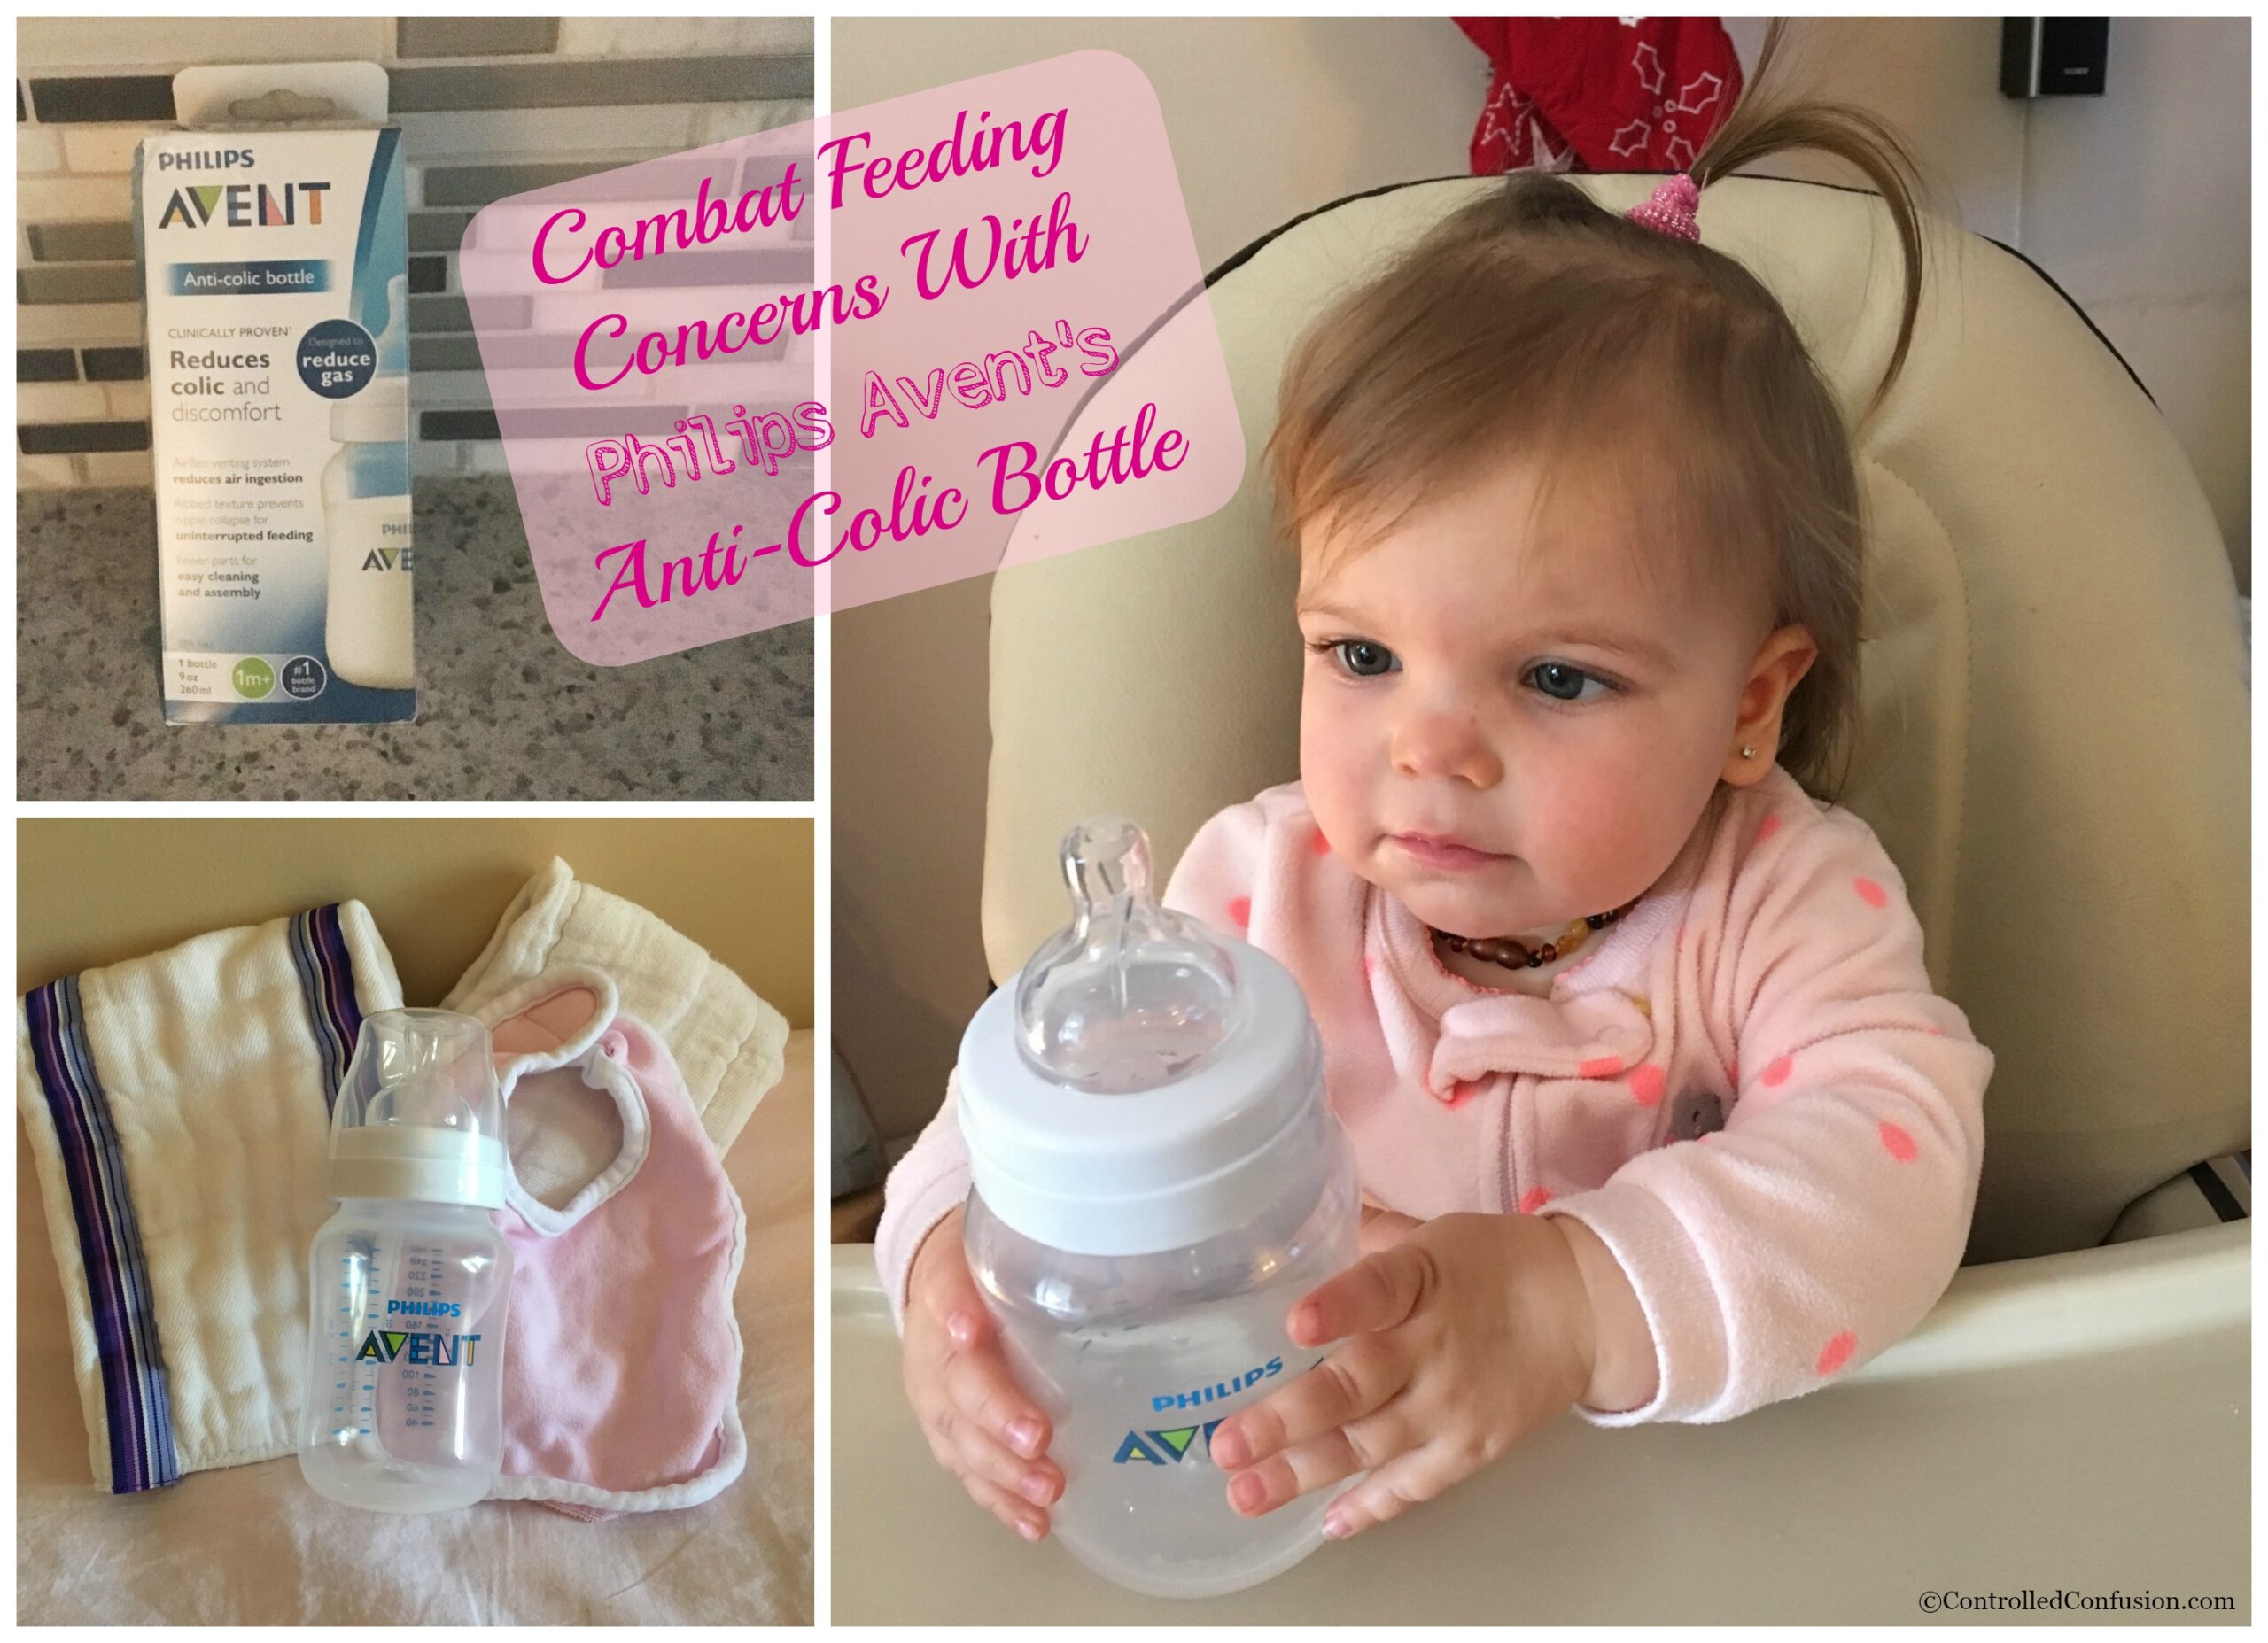 Combat Feeding Concerns With Philips Avent’s Anti-Colic Bottle